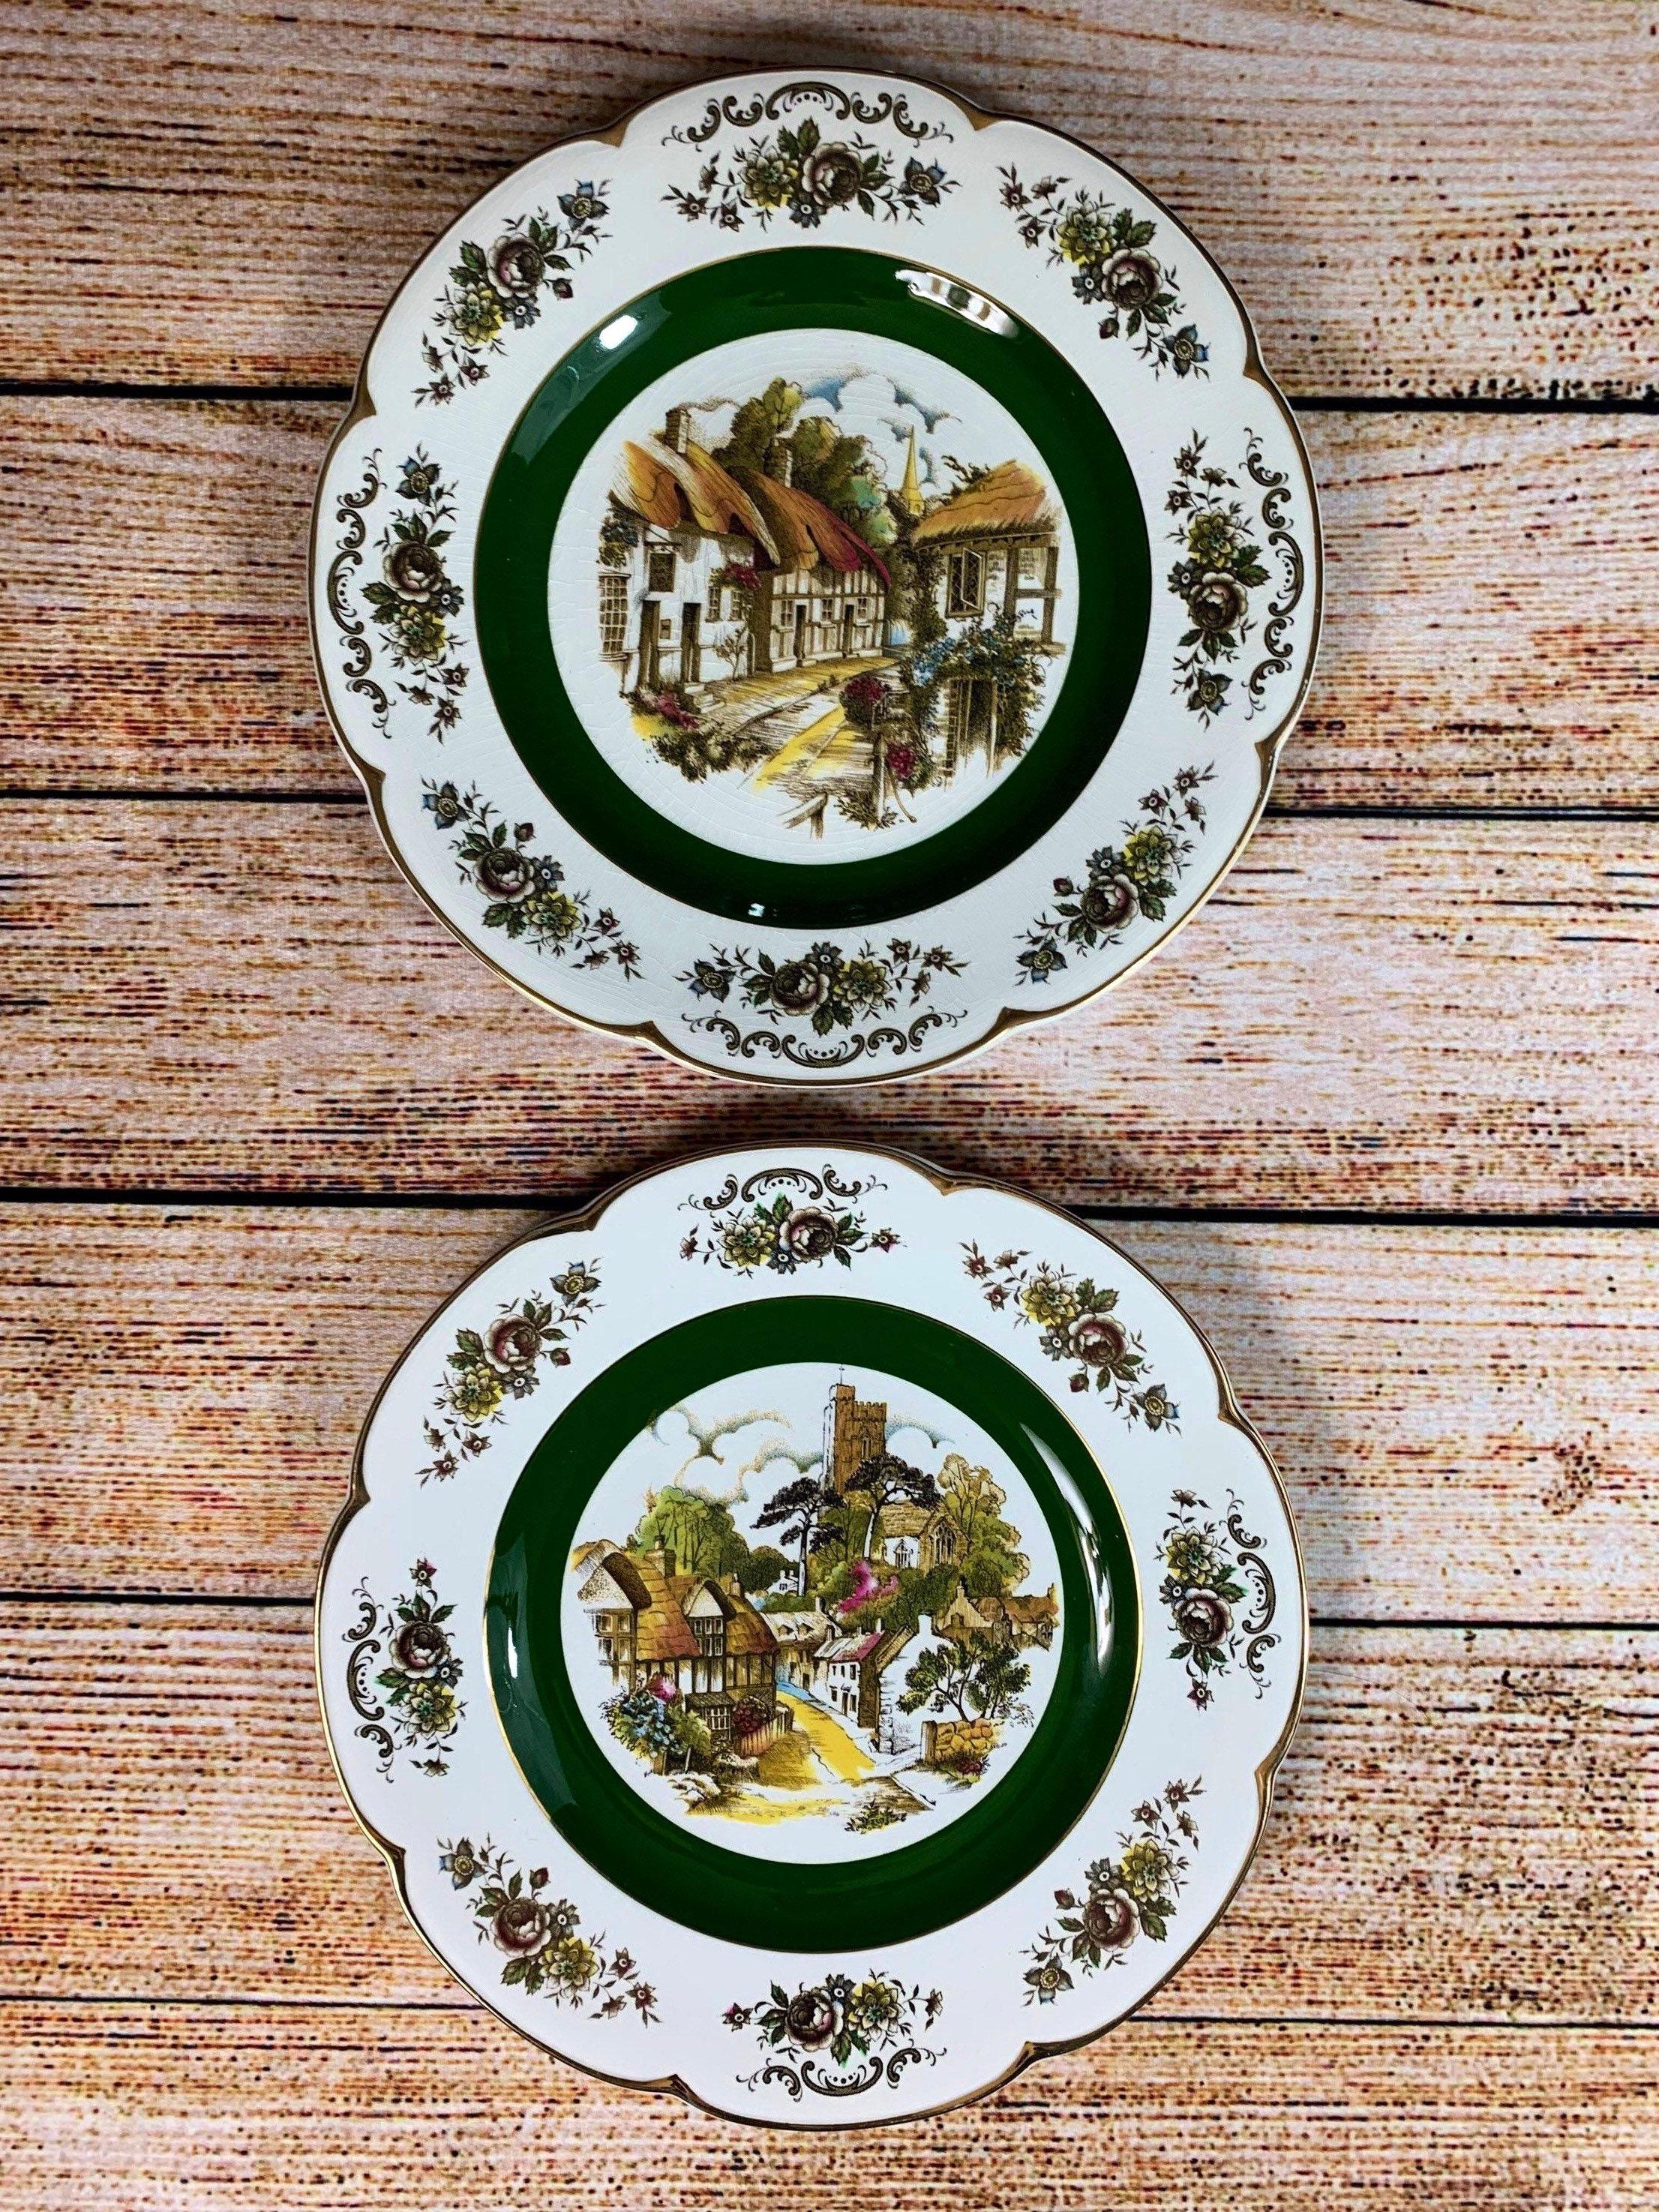 Alpine white ironstone Ascot service plates by Wood and Sons. Made in England, mid 20th century. 10.5 inch diameter. 

A beautiful pair to hang/display with rich autumn tones of green, gold, wheat, red, and orange. 

Food safe as well, perfect to